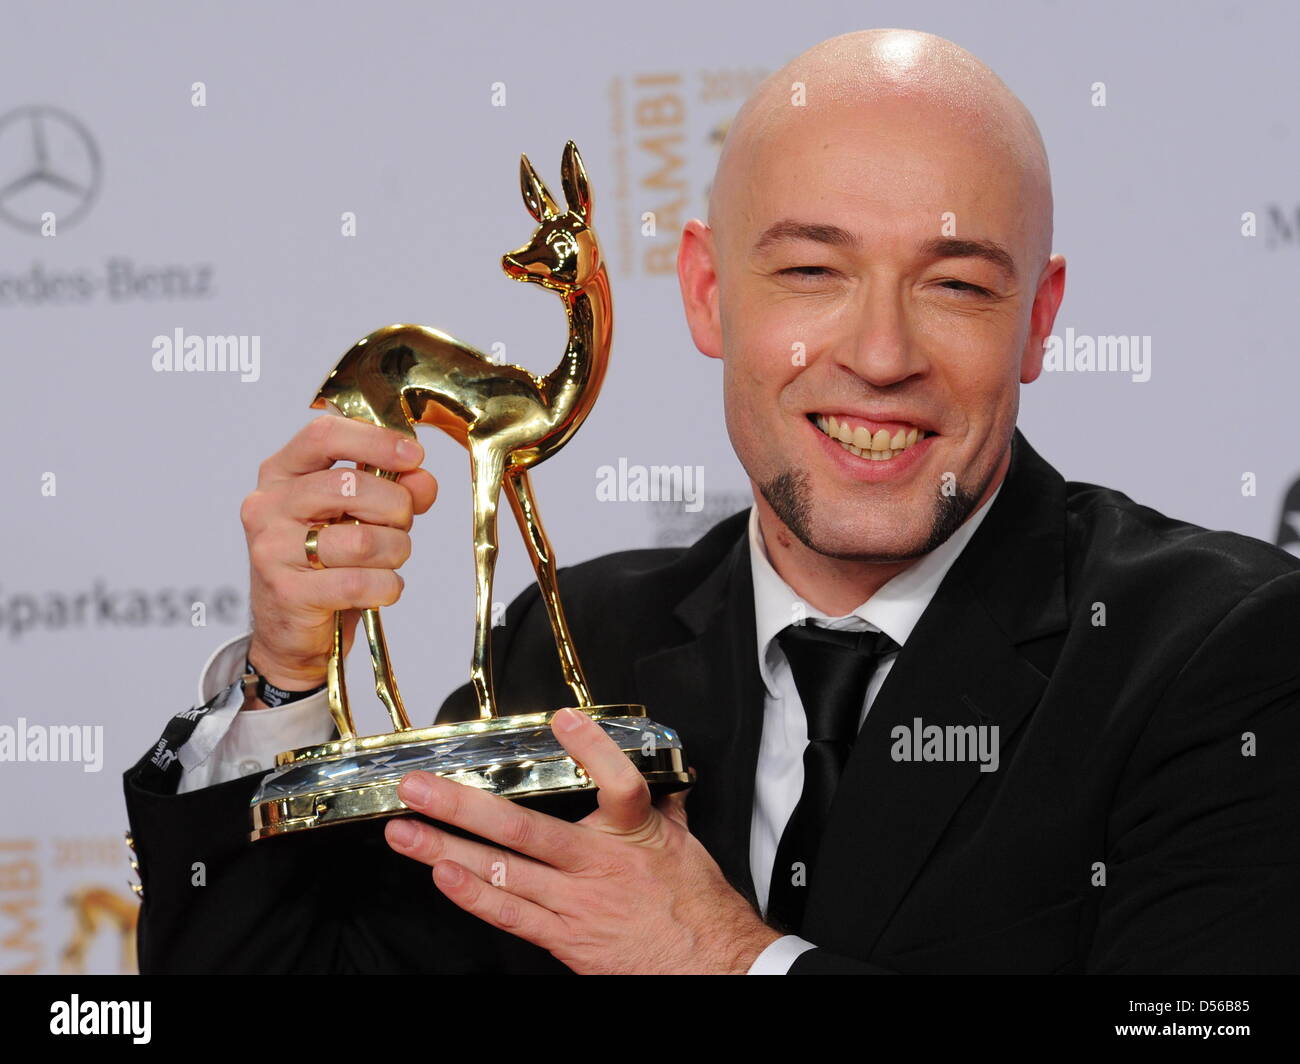 German singer Der Graf from Unheilig poses after receiving the Bambi Trophy with German actor Hannes Jaennicke during 62nd Bambi award in Potsdam, Germany, 11 November 2010. The Bambi is Germanys main media award. Photo: Jens Kalaene dpa/lbn  +++(c) dpa - Bildfunk+++ Stock Photo